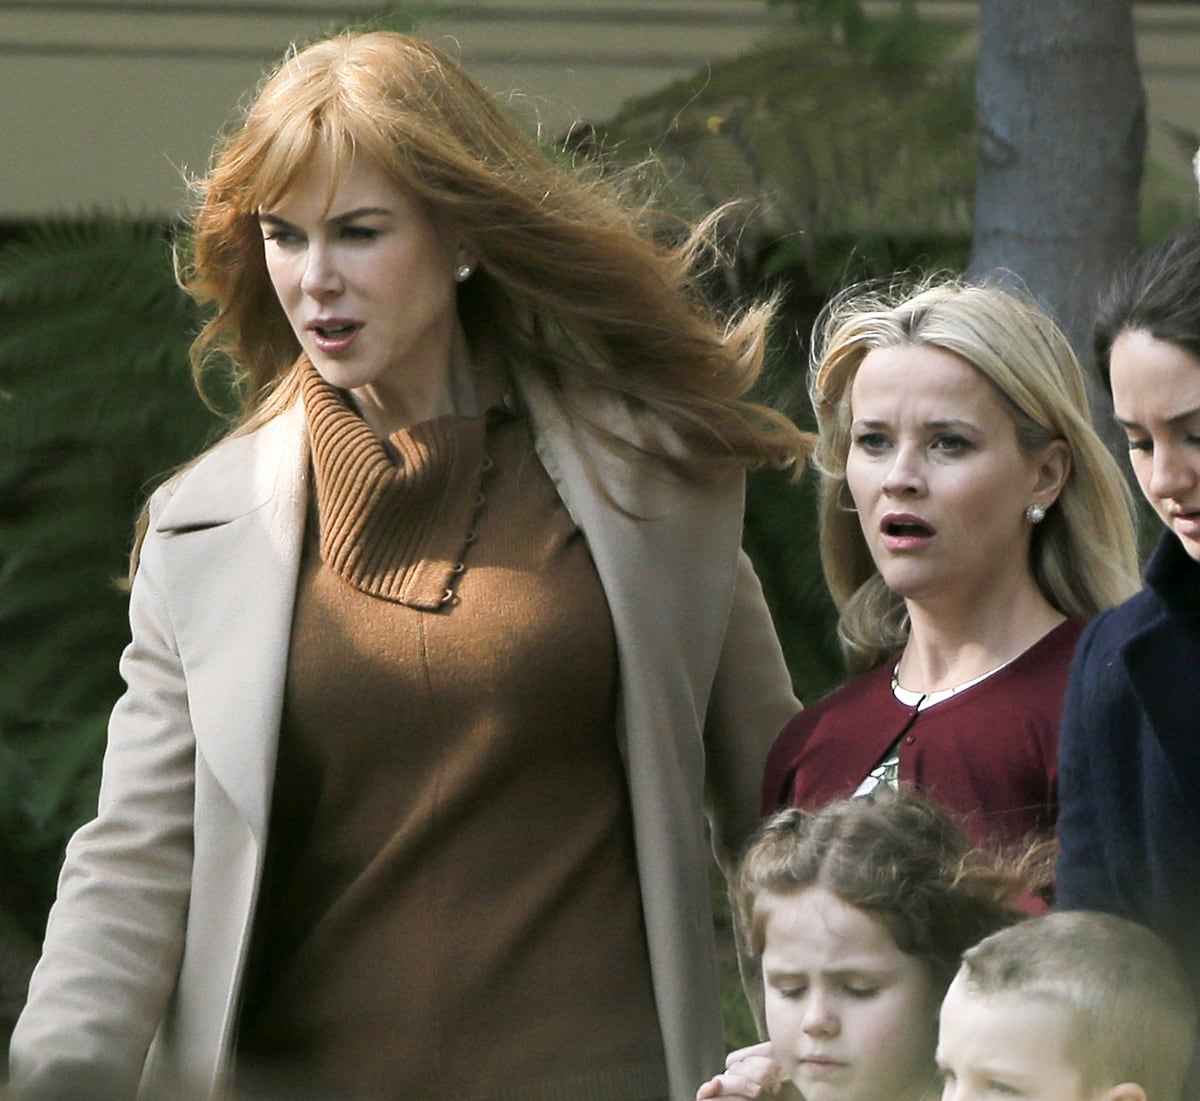 Reese Witherspoon and Nicole Kidman became close friends while filming the American drama television series Big Little Lies